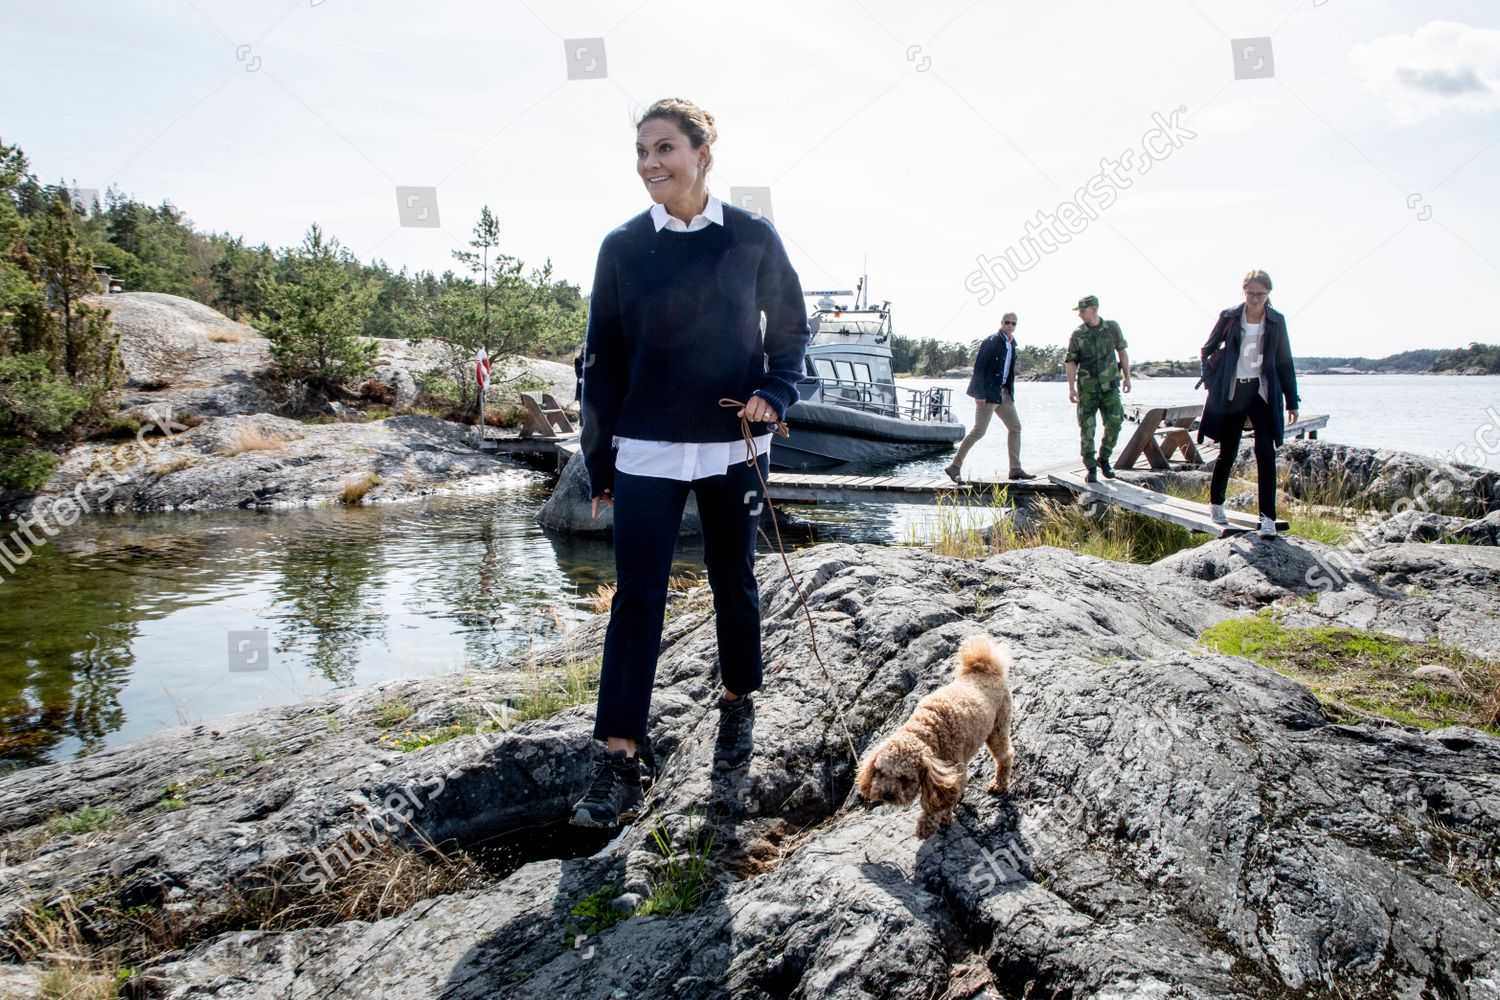 crown-princess-victoria-and-her-dog-rio-visit-alo-and-uto-sweden-shutterstock-editorial-12361980v.jpg